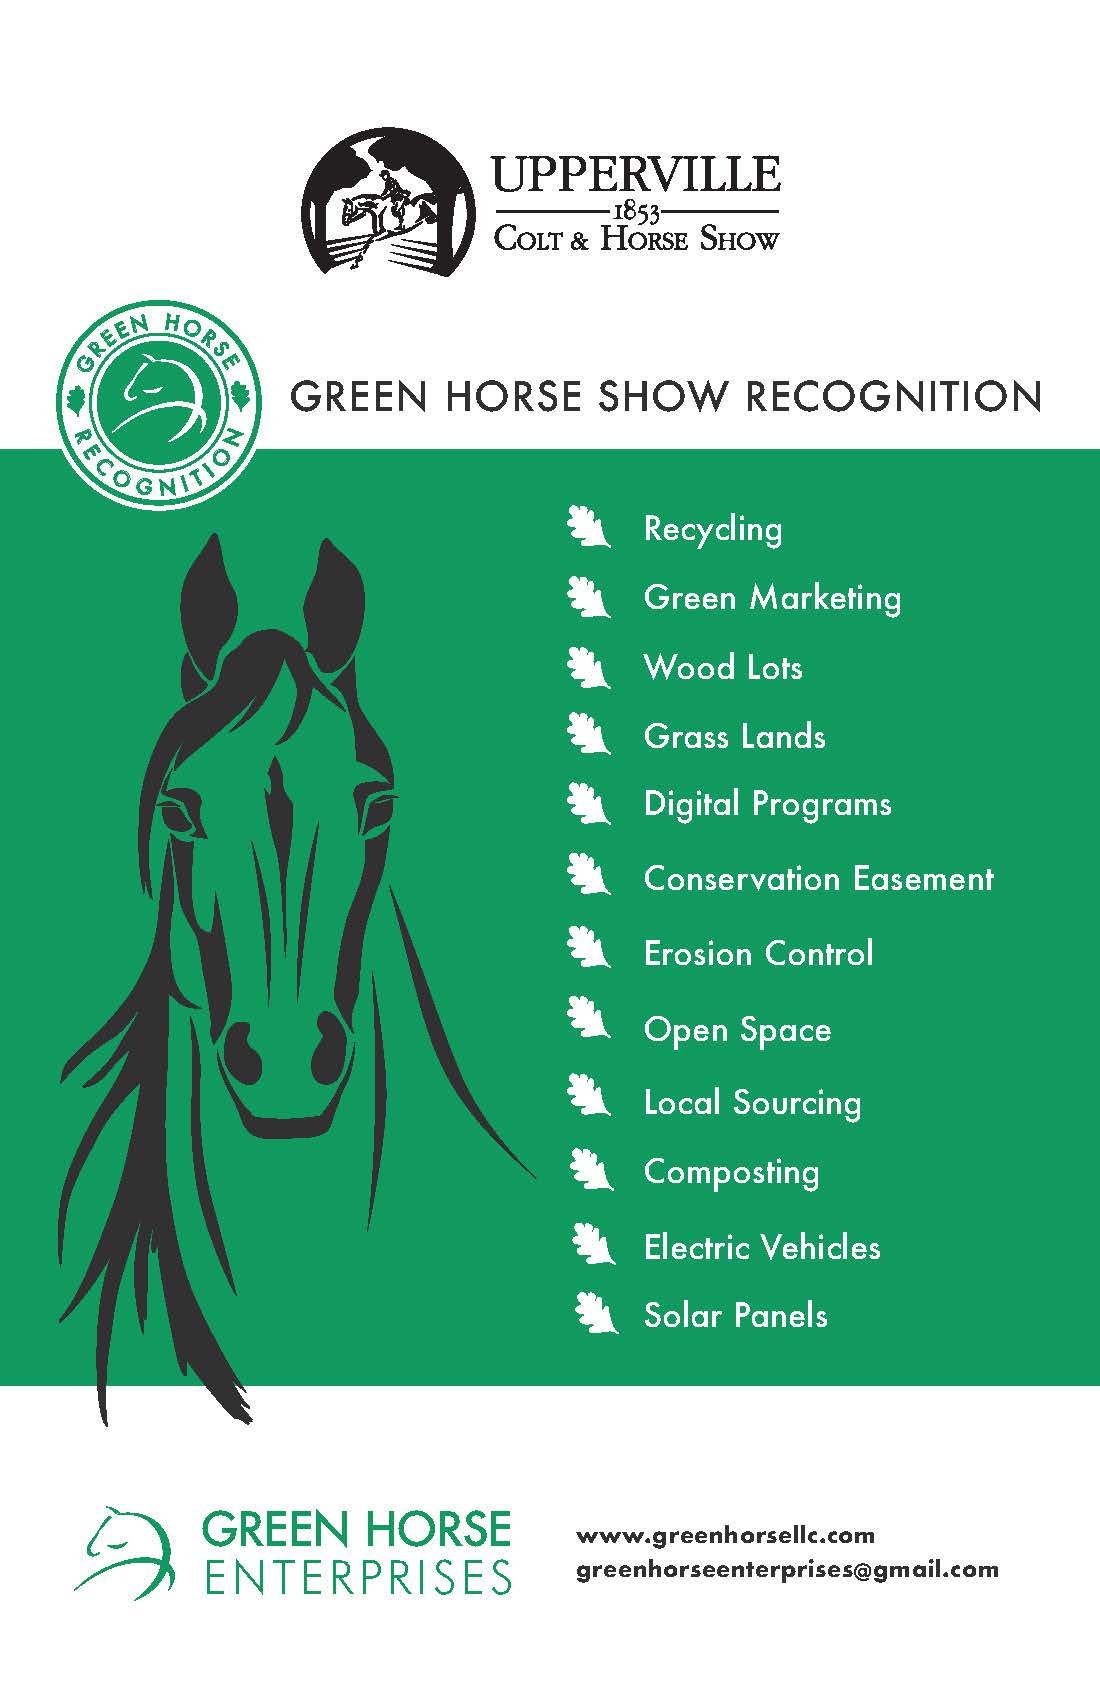 GREEN HORSE SHOW RECOGNITION